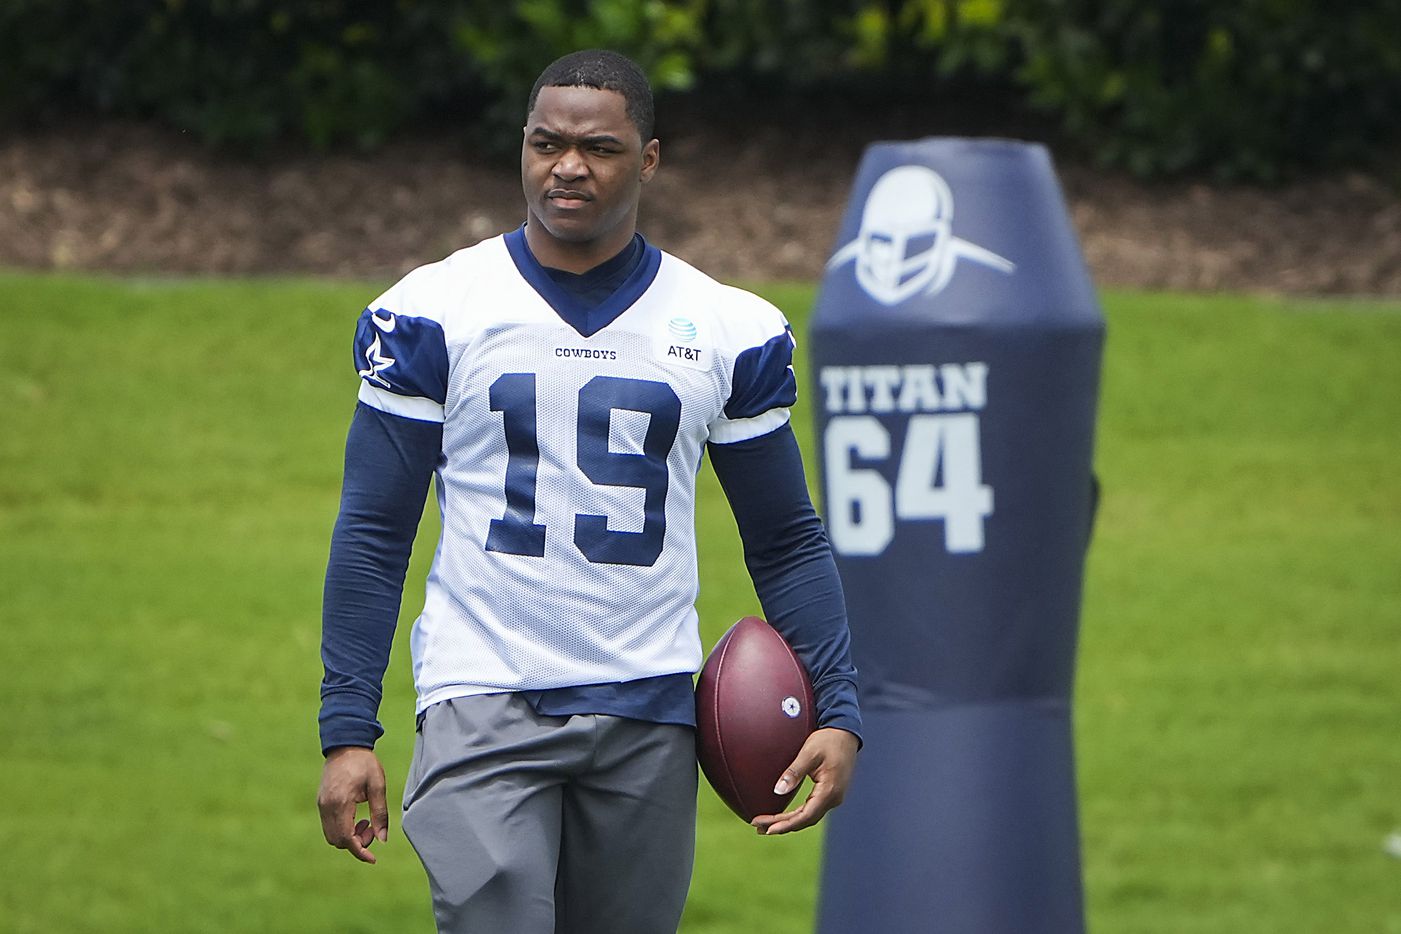 Dallas Cowboys wide receiver Amari Cooper watches his teammates run drills during a minicamp practice at The Star on Tuesday, June 8, 2021, in Frisco. (Smiley N. Pool/The Dallas Morning News)